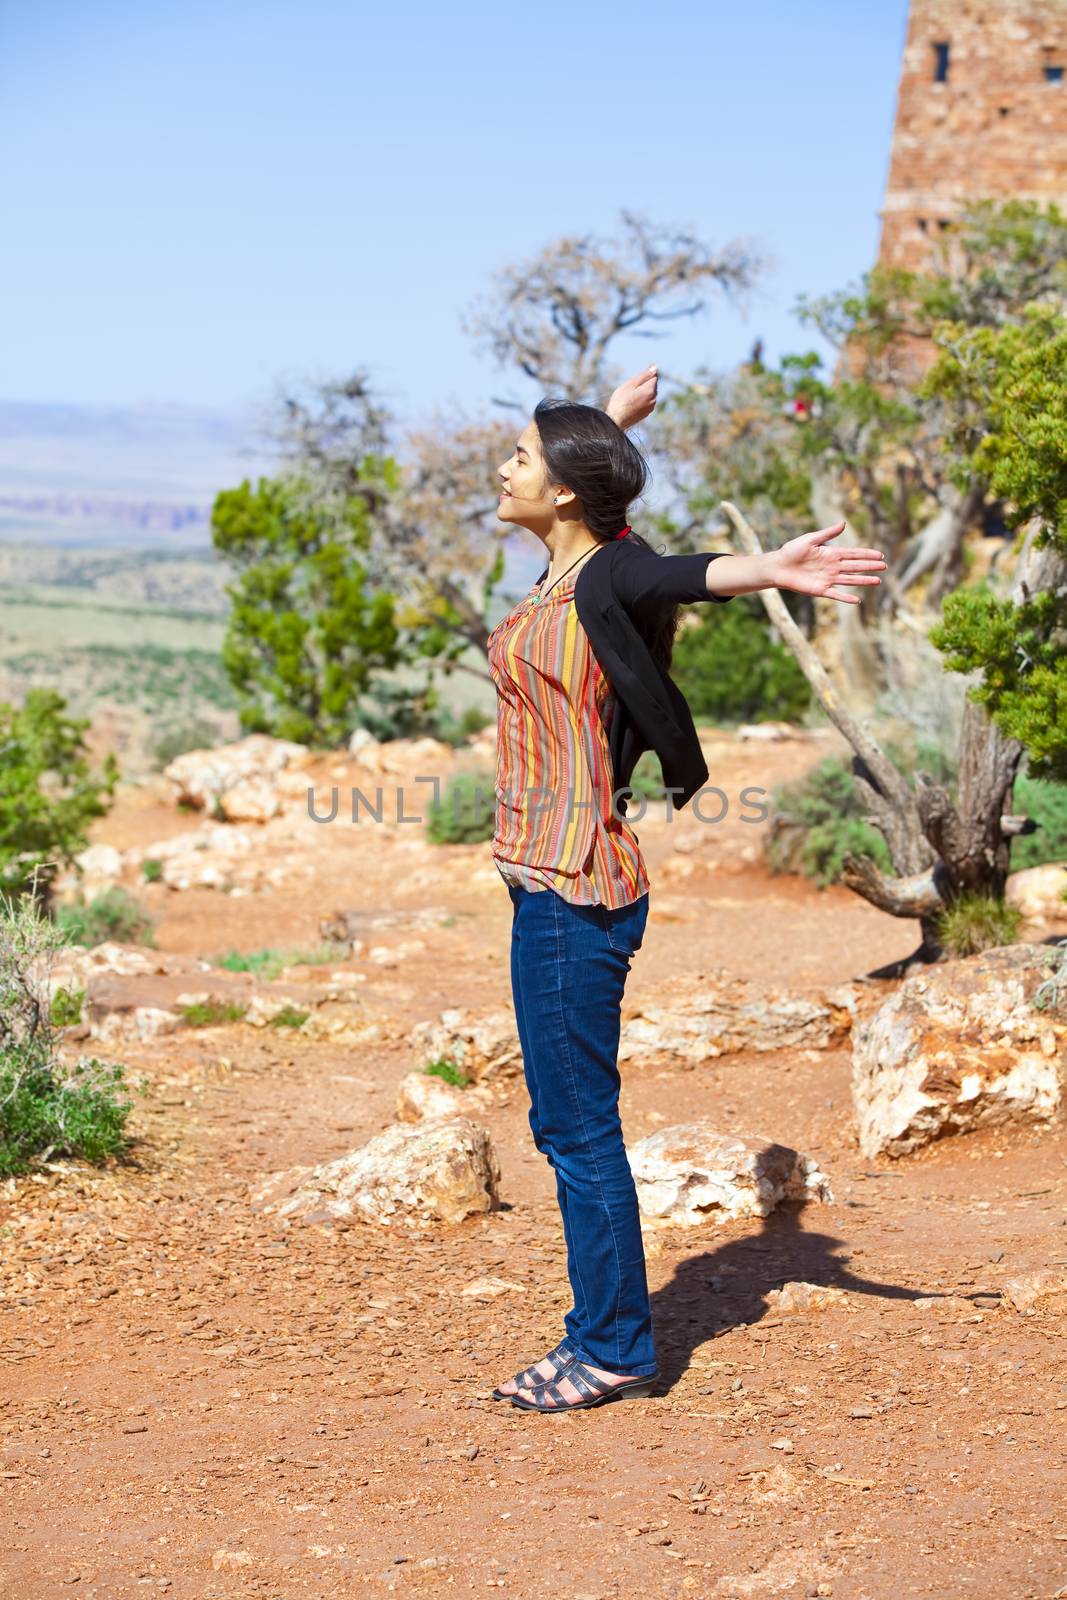 Biracial teen girl raising arms in praise at the Grand Canyon, happy expression